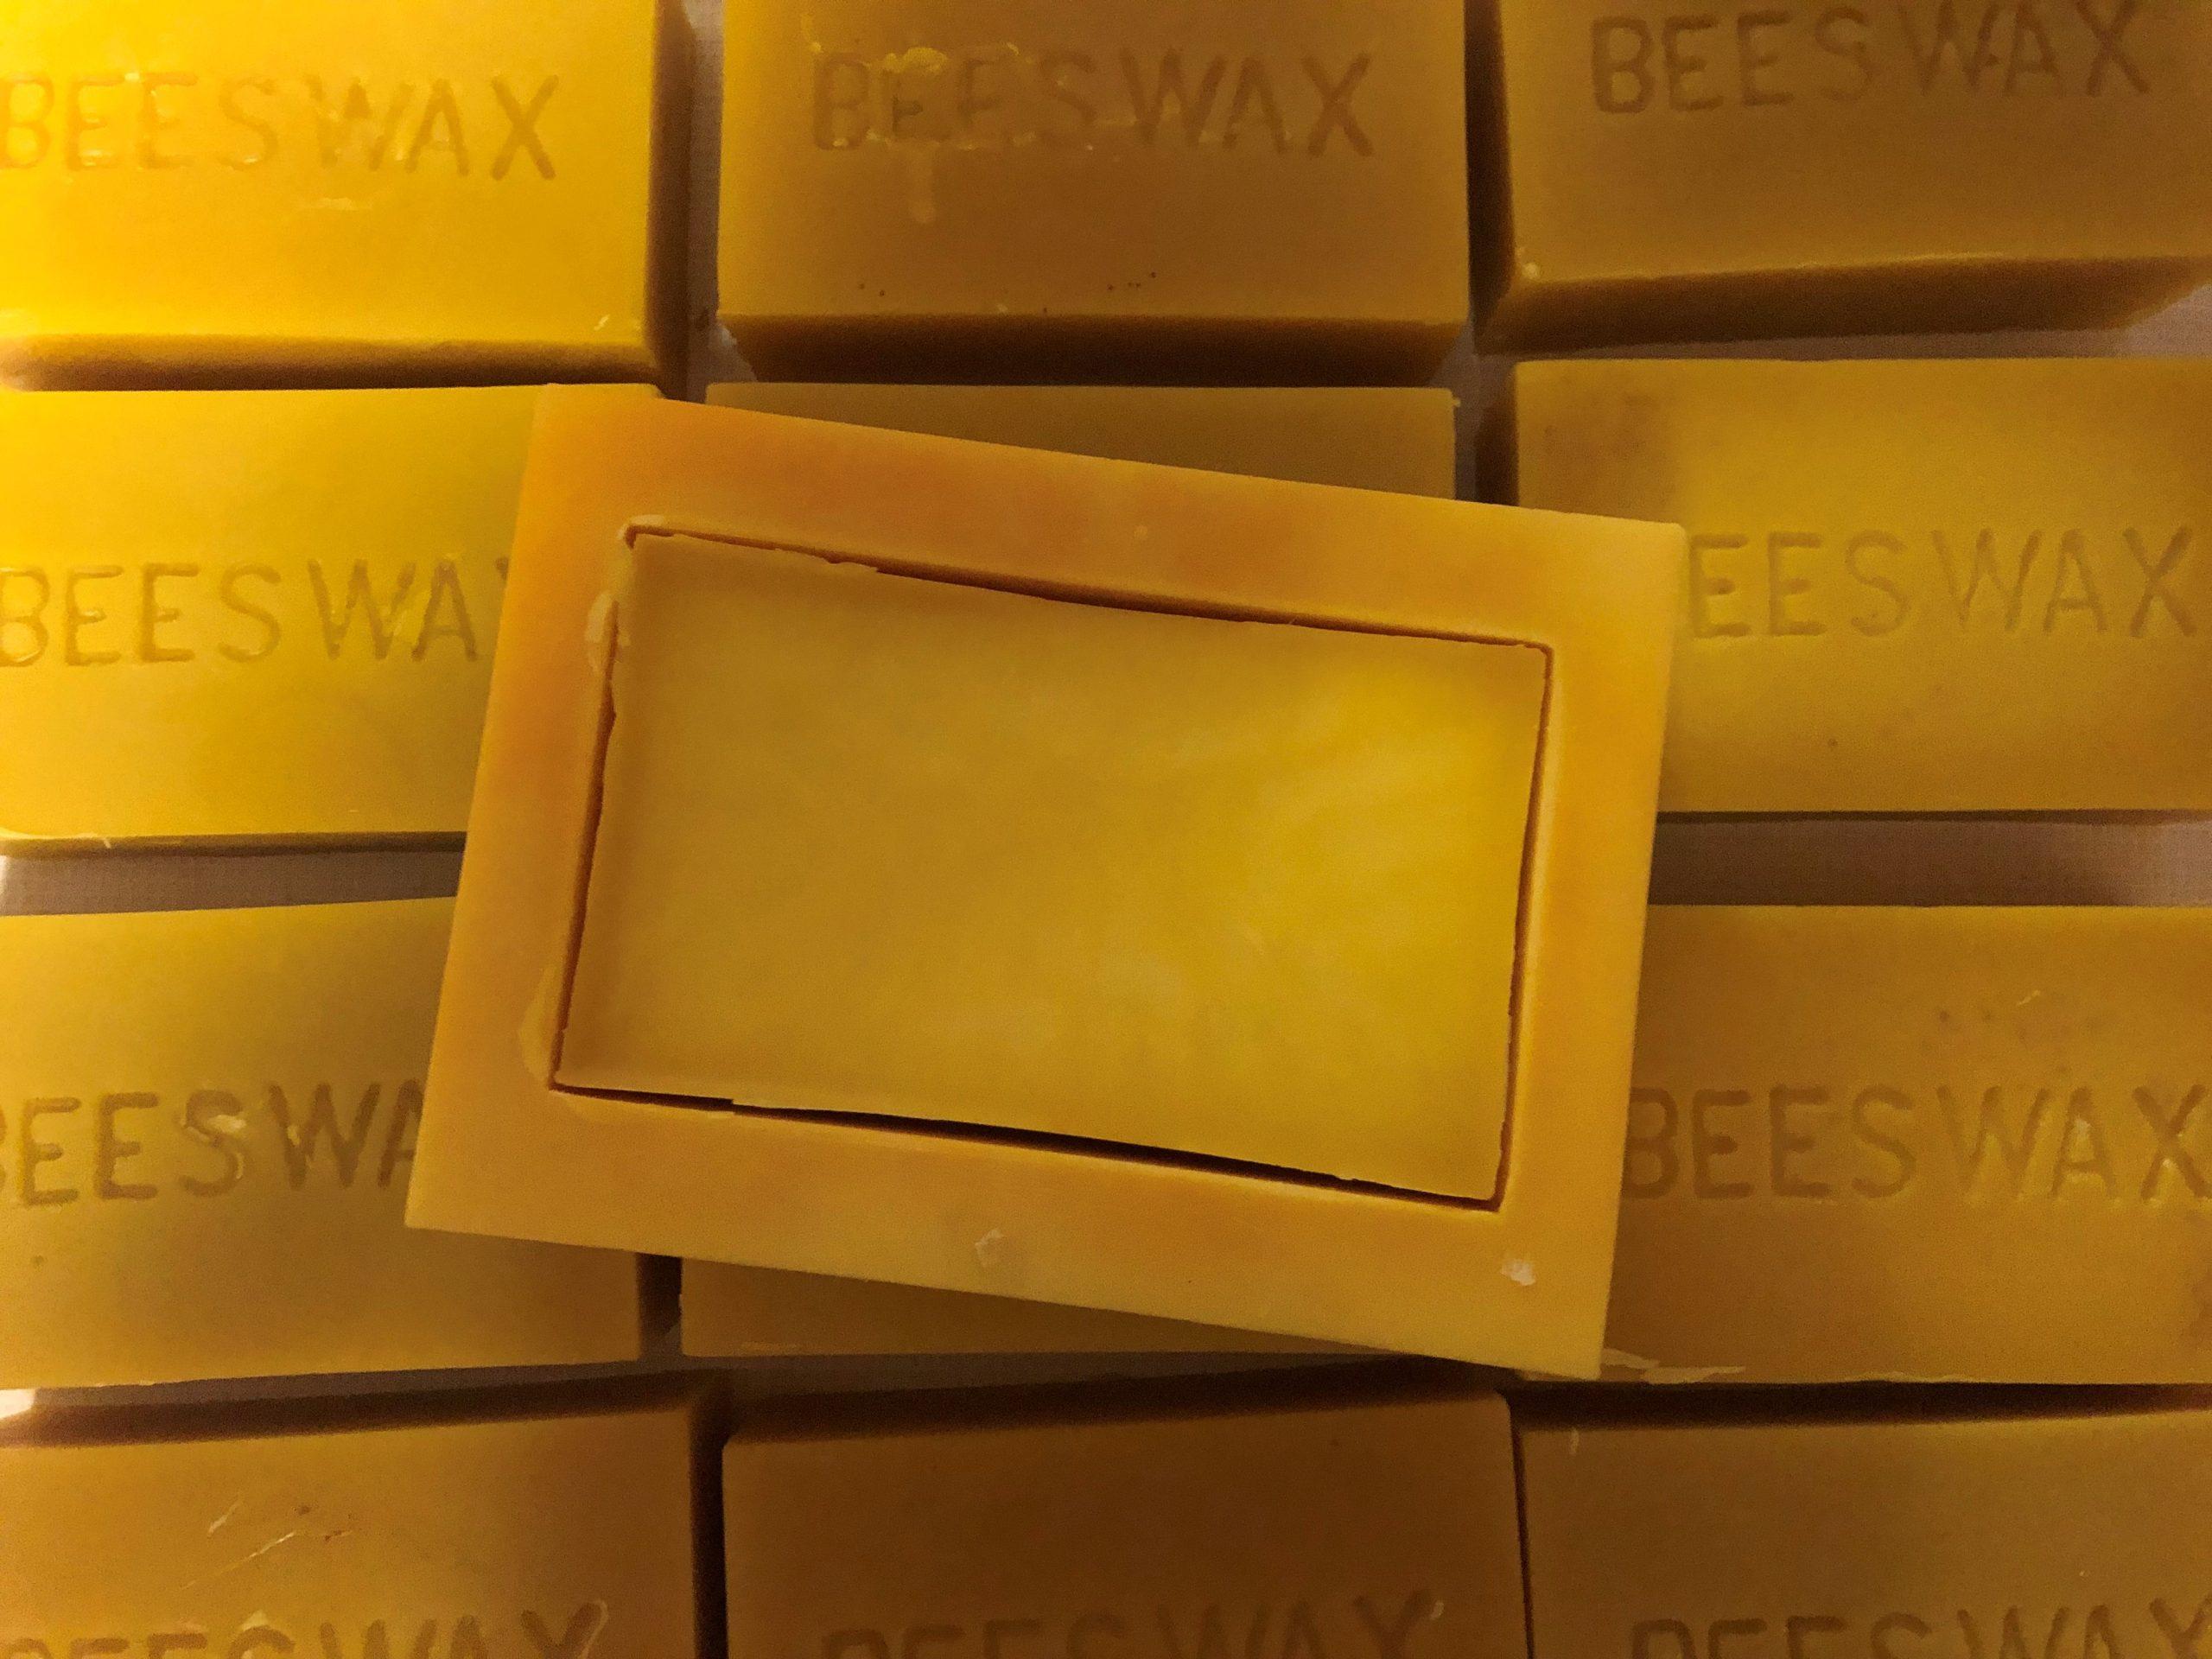 Raw Beeswax ,100 % Pure Beeswax ,Natural Beeswax , Beeswax for Candle  Making, Soap making, Making Supplies